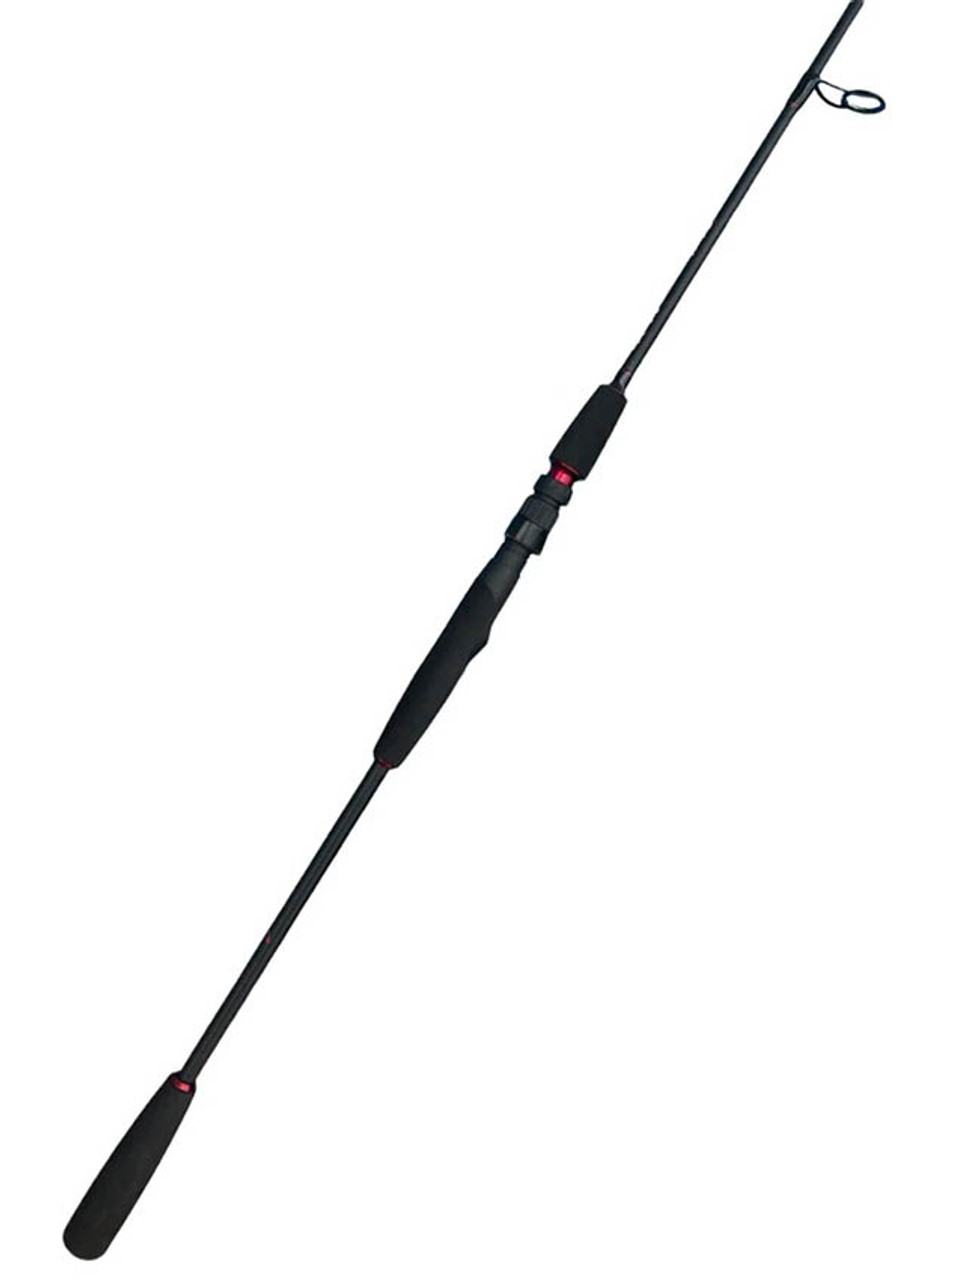 Wii Fishing Rod with Reel   price tracker / tracking